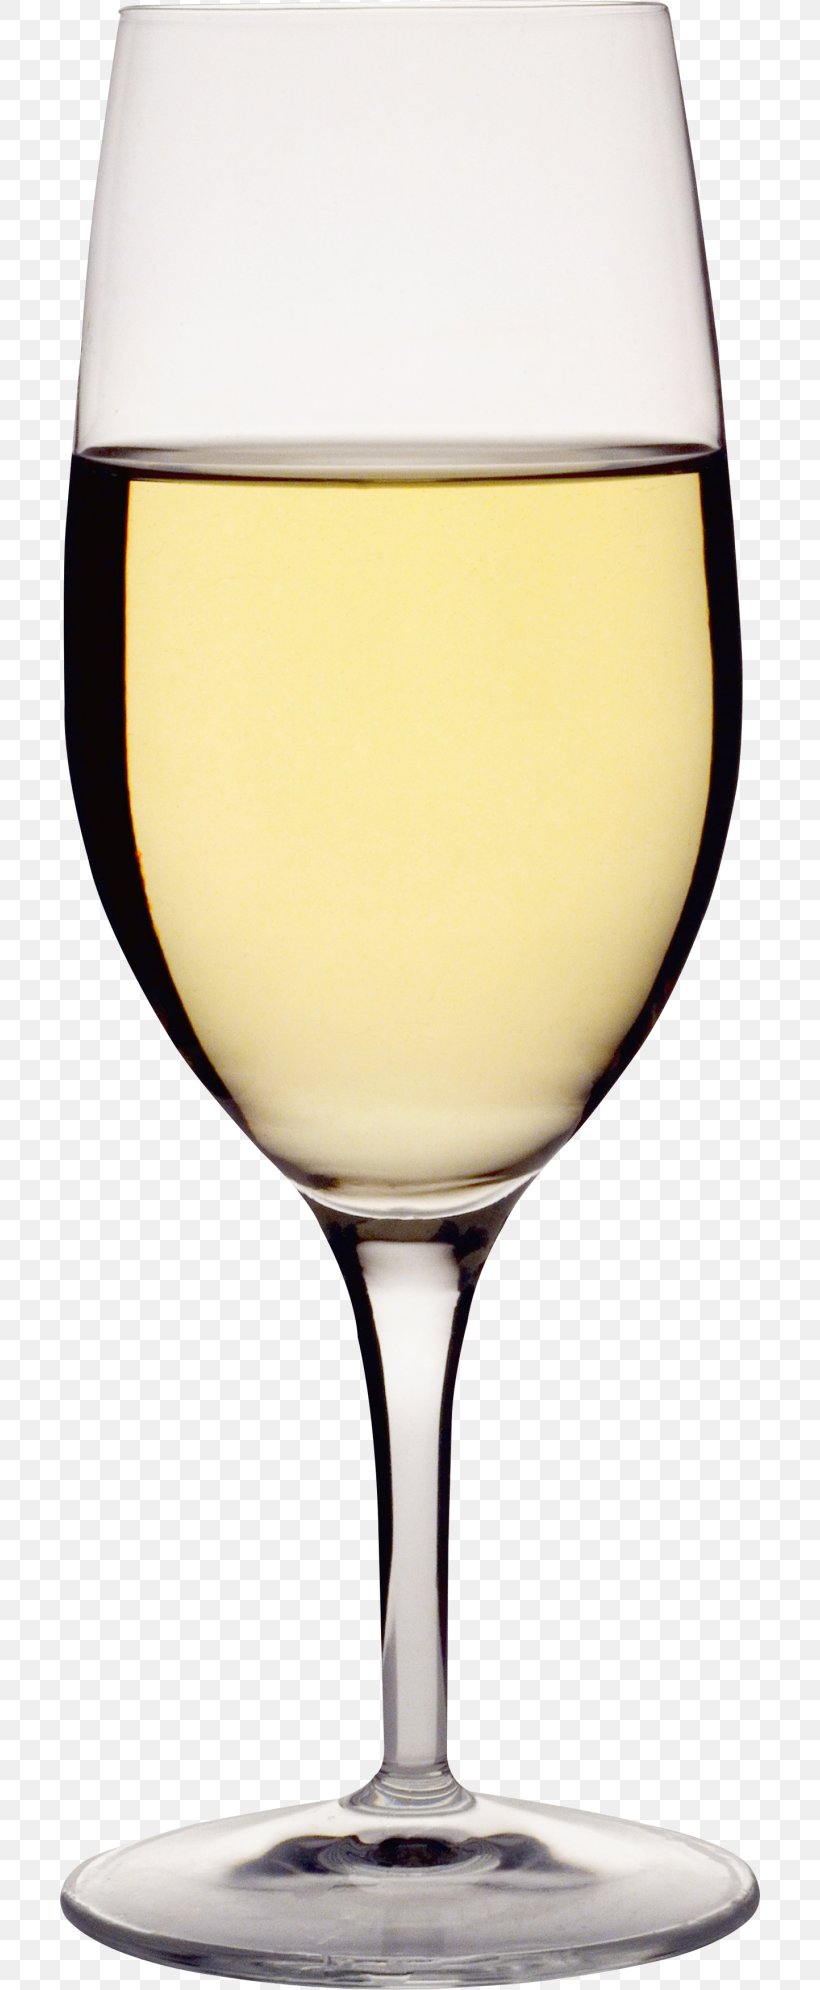 Sparkling Wine Champagne White Wine Wine Glass, PNG, 700x1990px, Wine, Alcoholic Drink, Beer Glass, Champagne, Champagne Glass Download Free